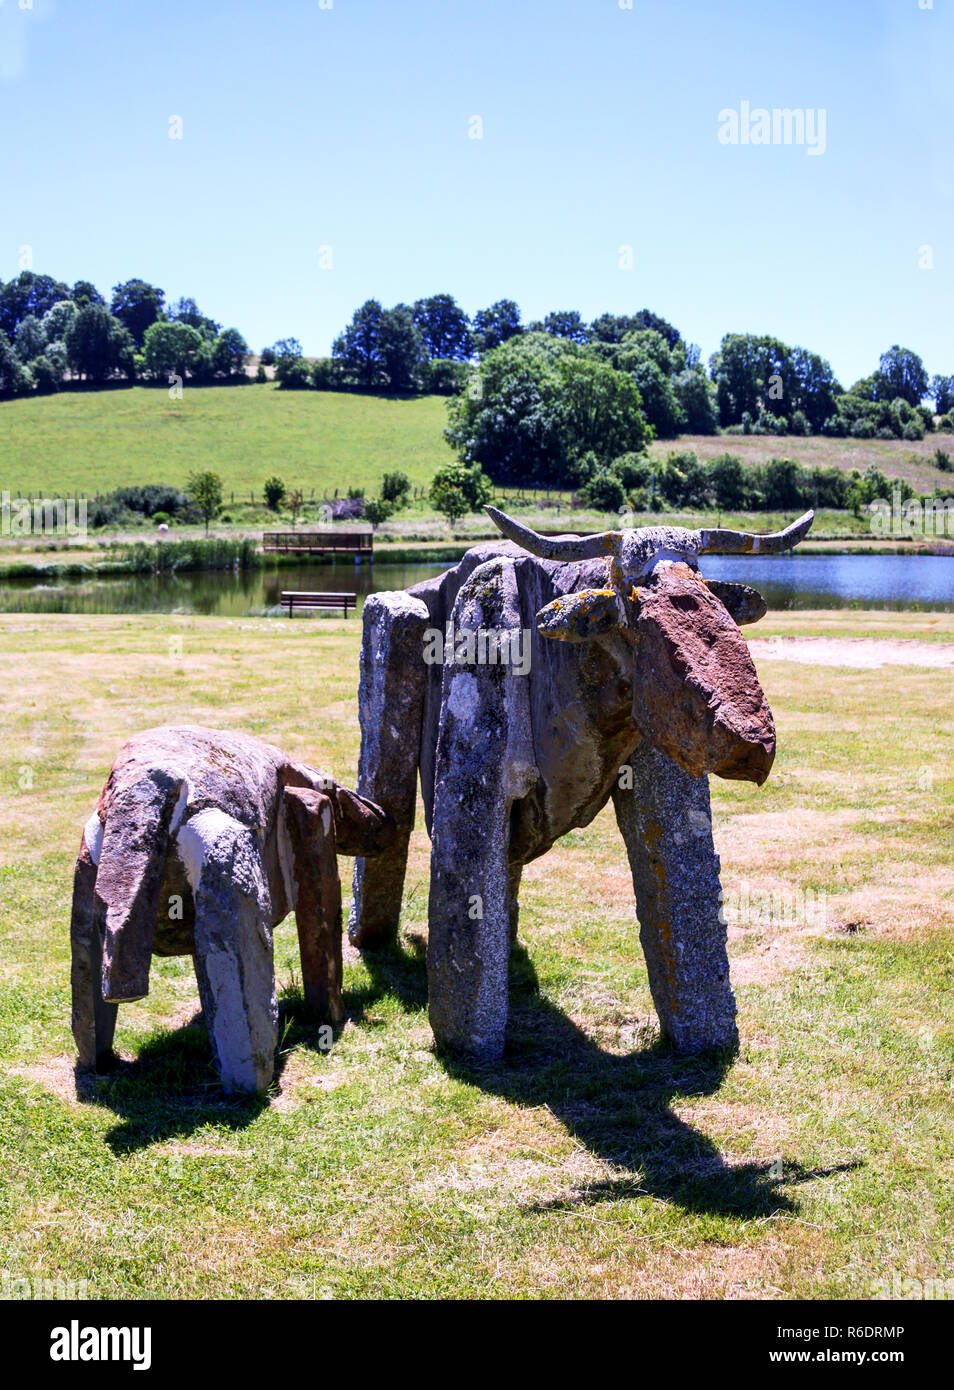 France. A fun item at a picnic site in Dept 12. Ayeyron. near Rodez. A natural stone sculpture of a cow and calf. Stock Photo